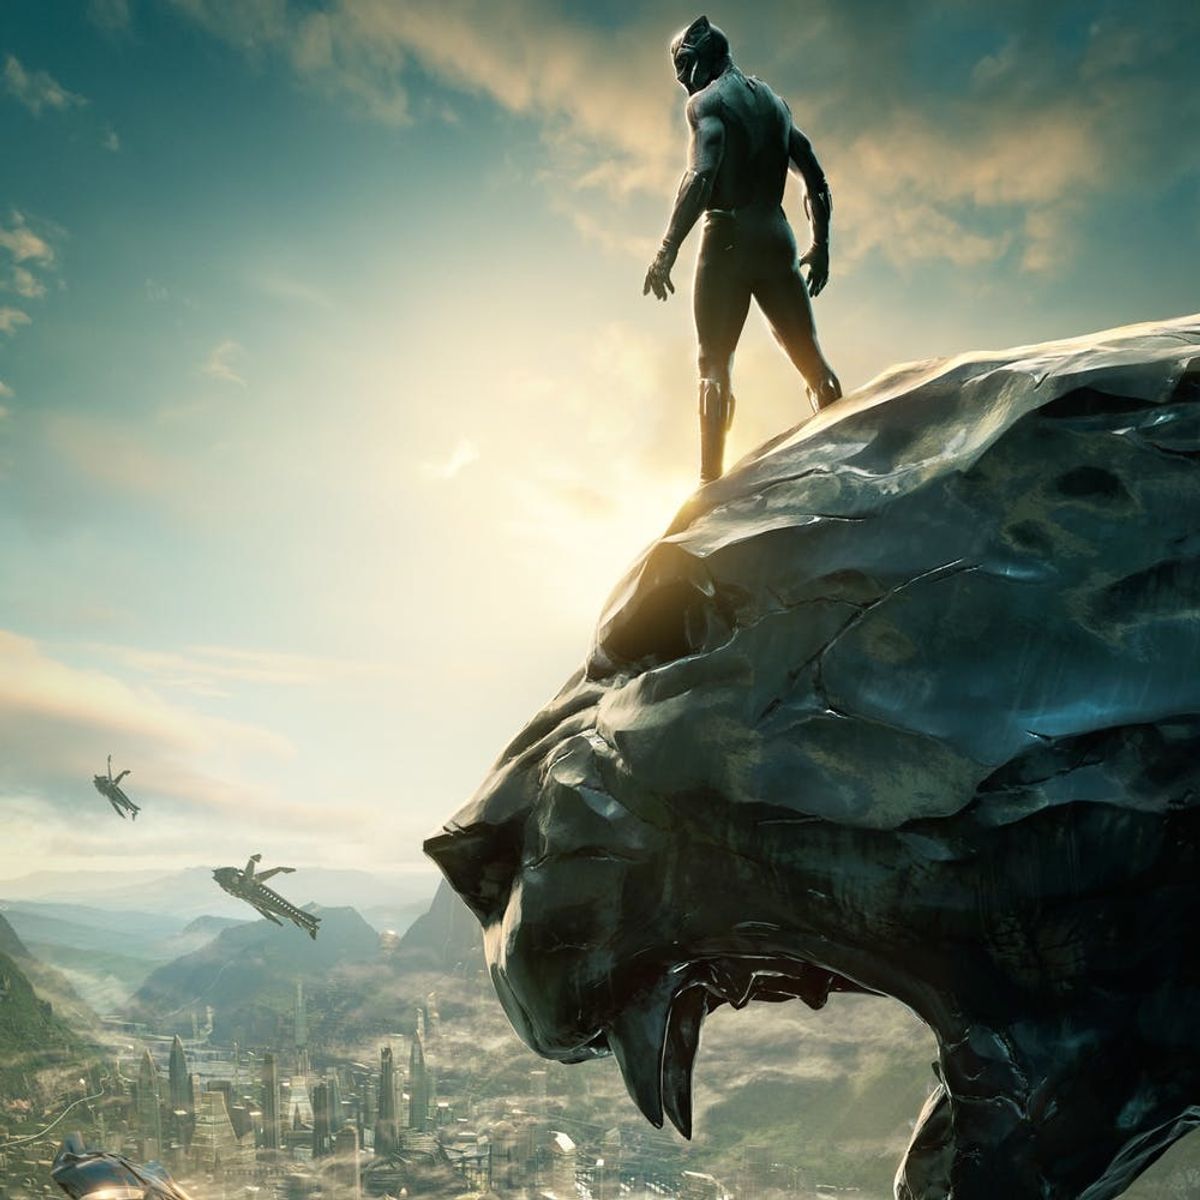 Marvel’s First Full “Black Panther” Trailer Is Here and It Looks Epic